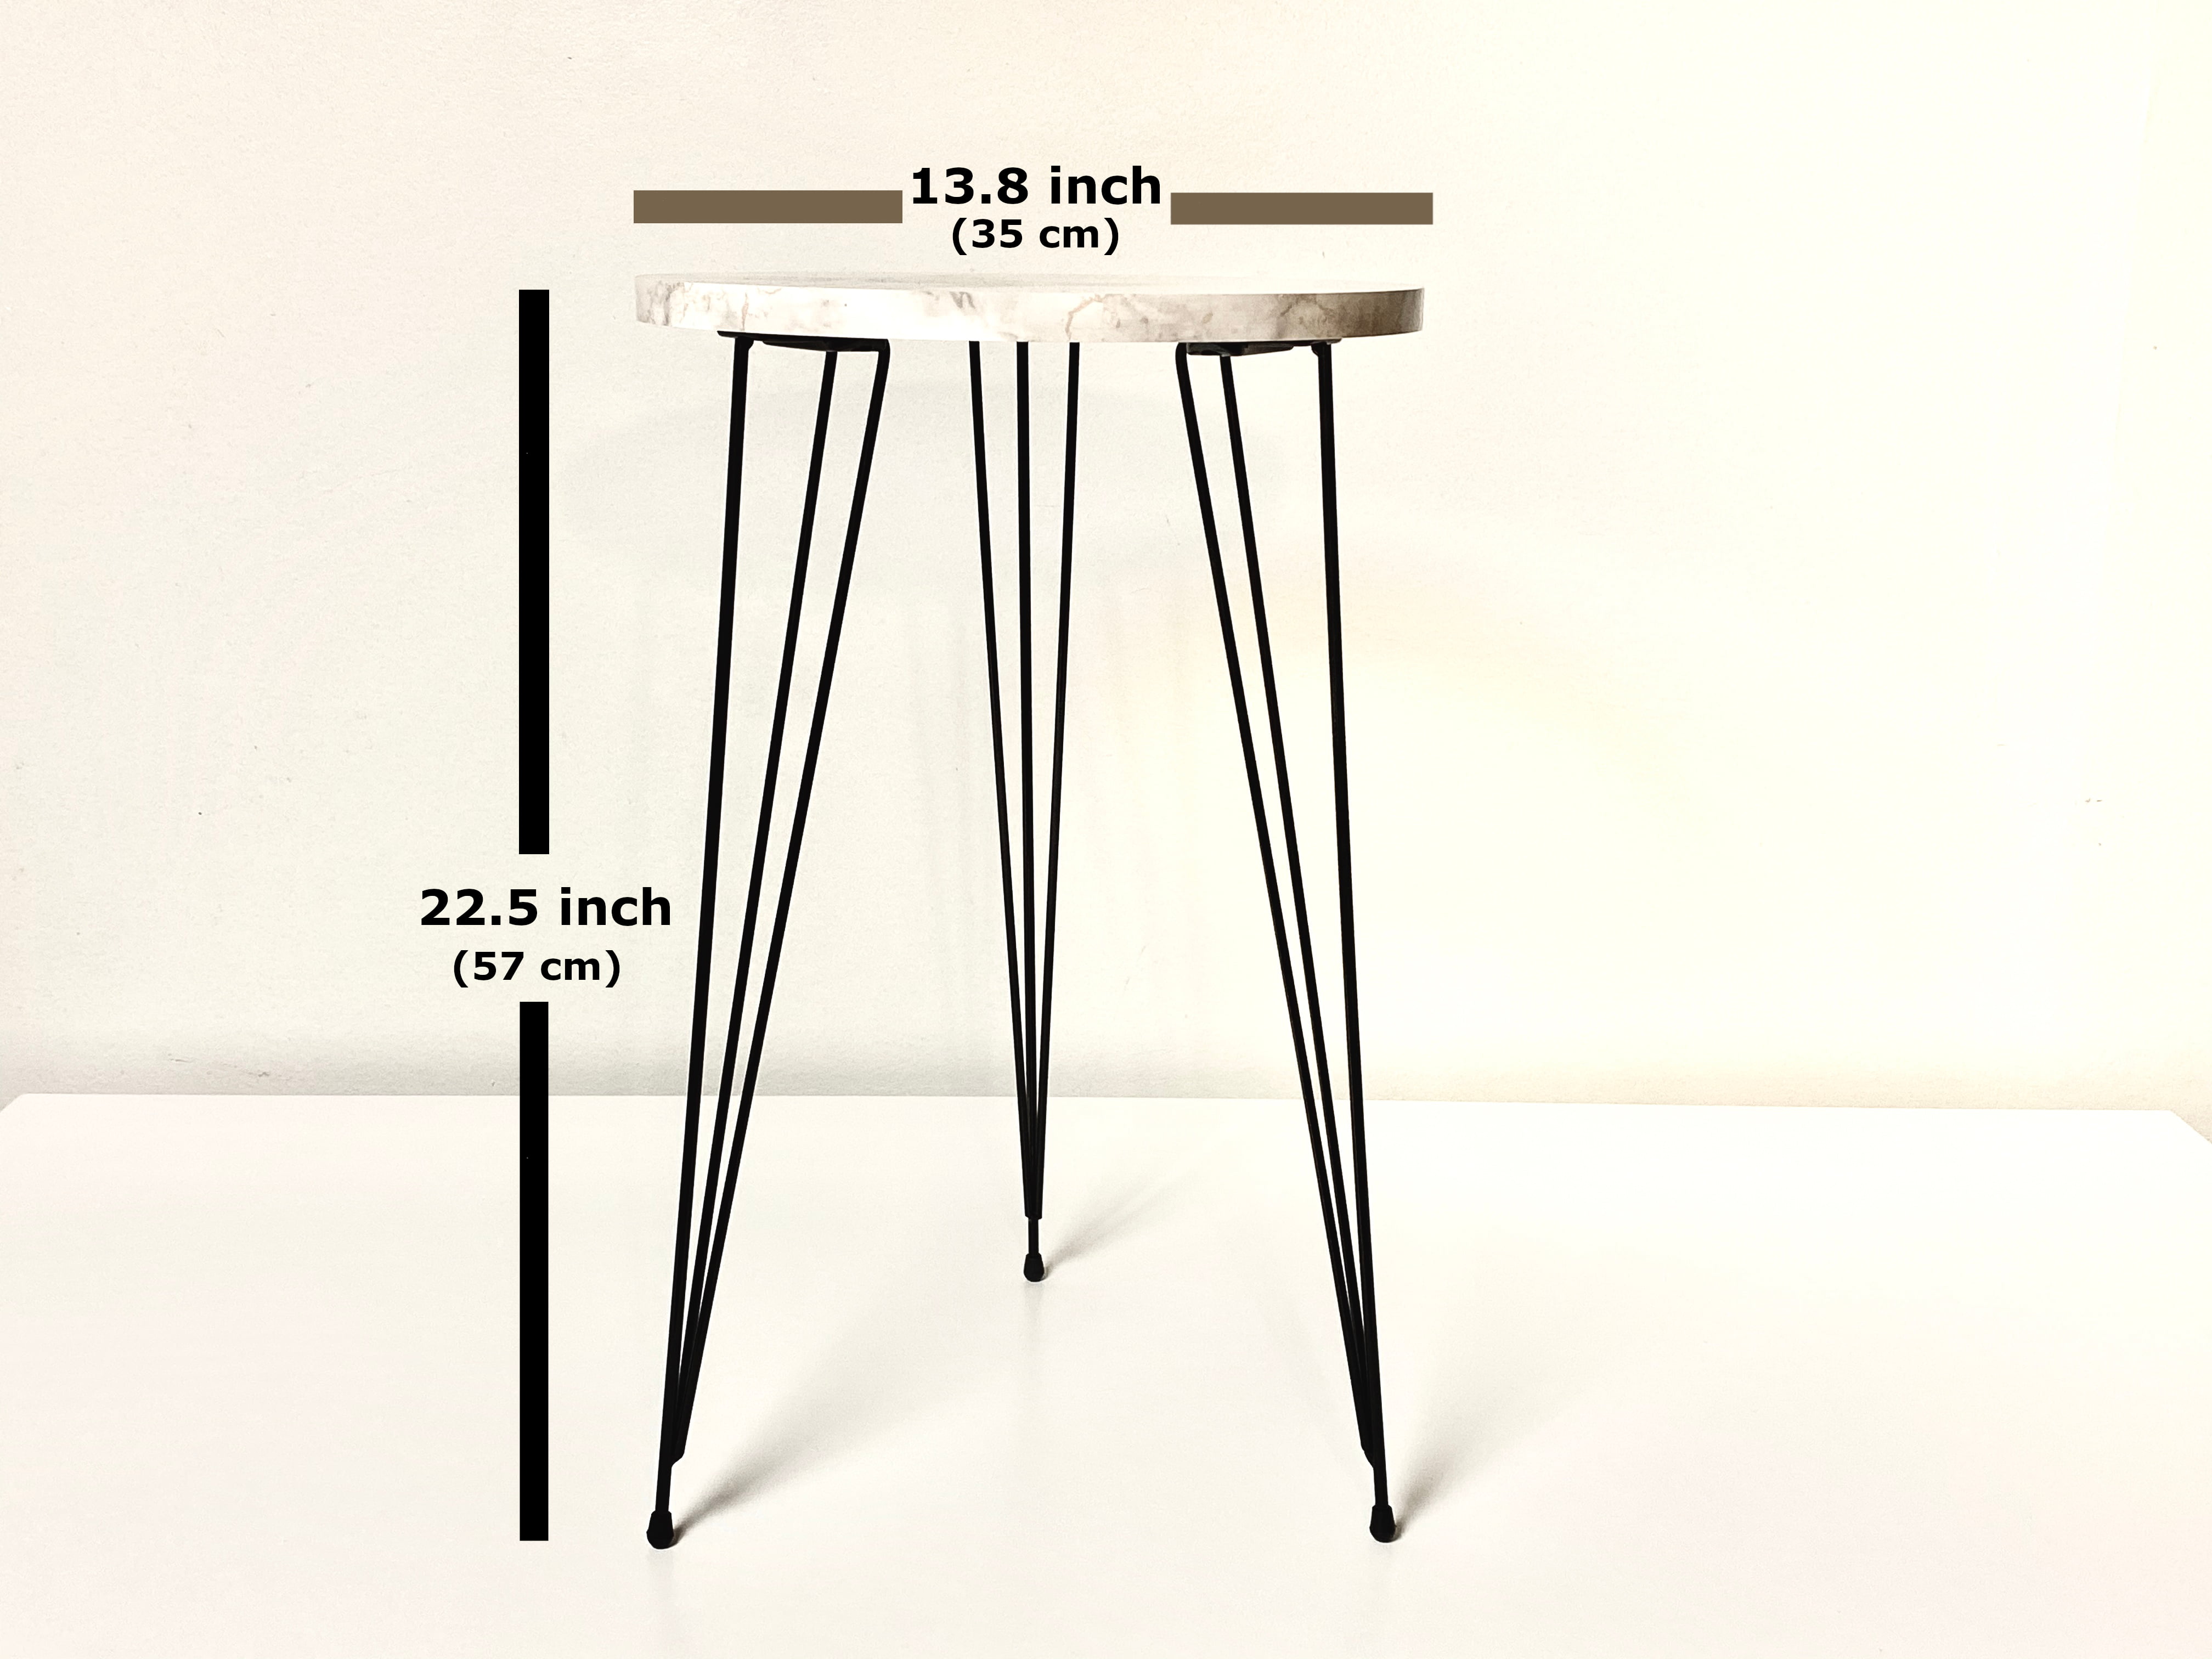 Nightstand Bedside Table with Metal Legs for Bedroom Living Room PAK Home Round Wood Sofa Side Tables for Small Spaces Set of 2 END Table Balcony Office White HIGH Gloss